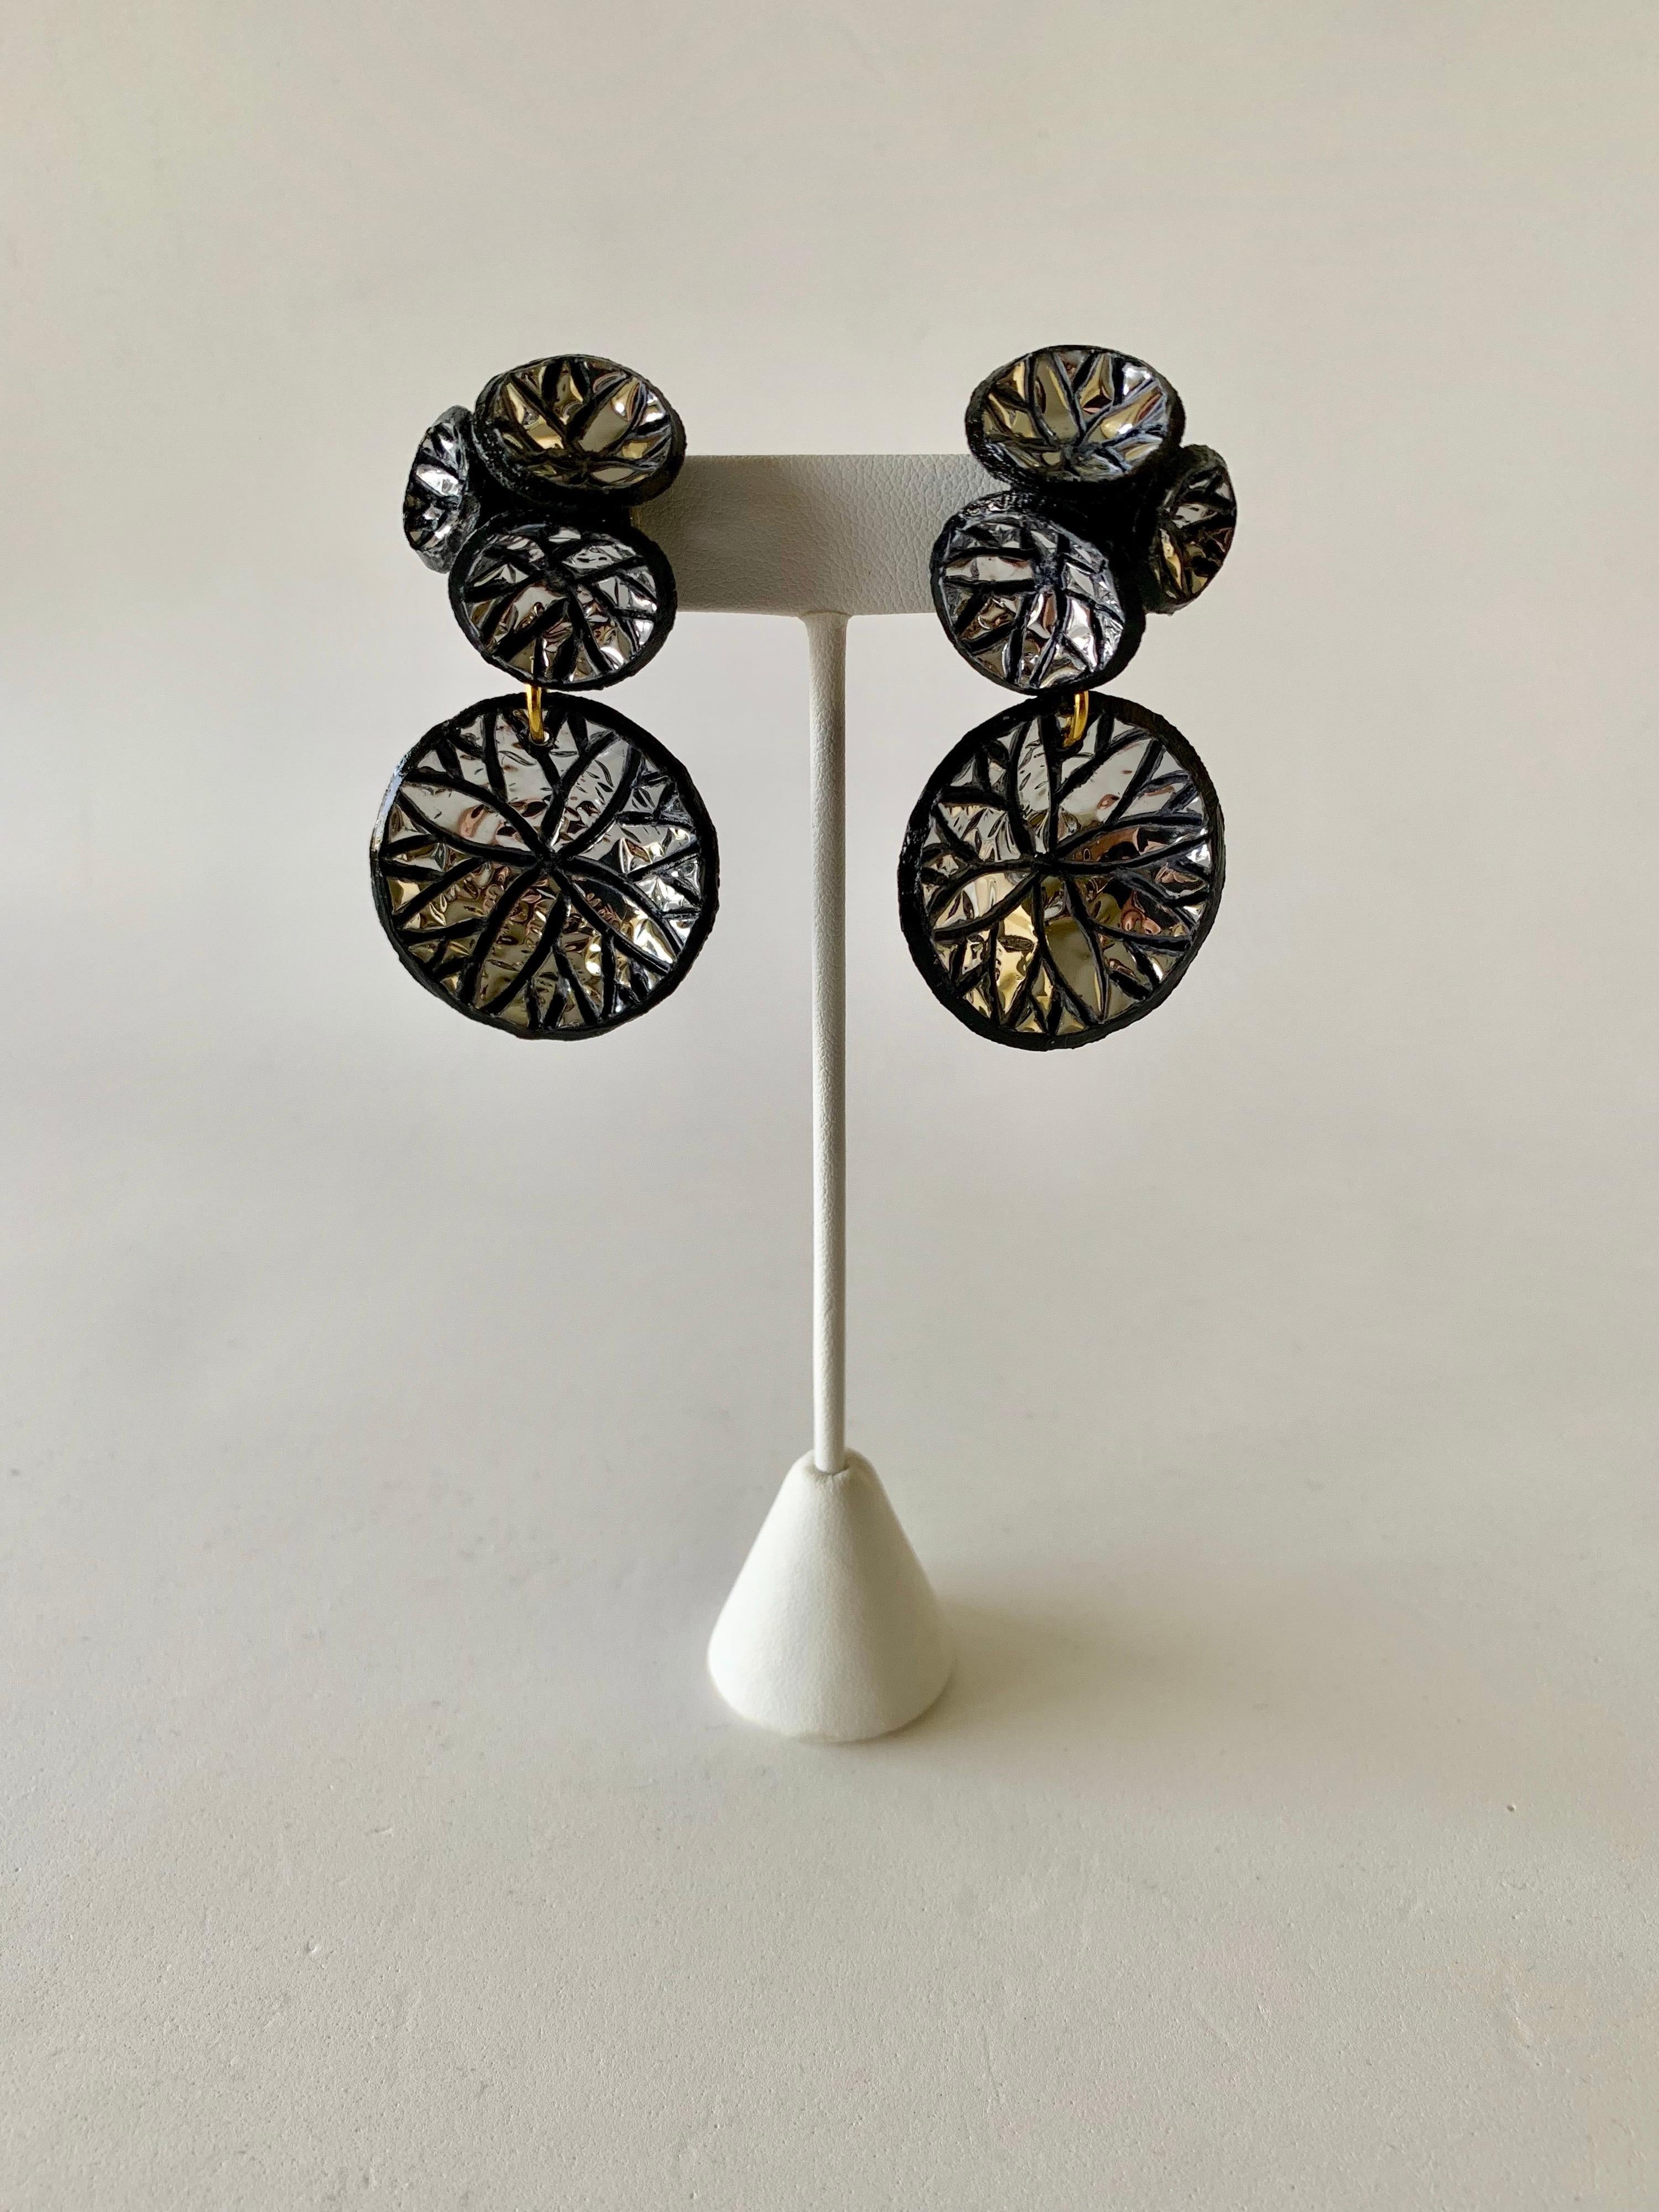 Light and easy to wear, these handmade artisanal contemporary disk earrings were made in Paris by Cilea. Concave black resin discs embellished with metallic silver leaf, clustered together to form a powerful statement piece - signed Cilea Paris on